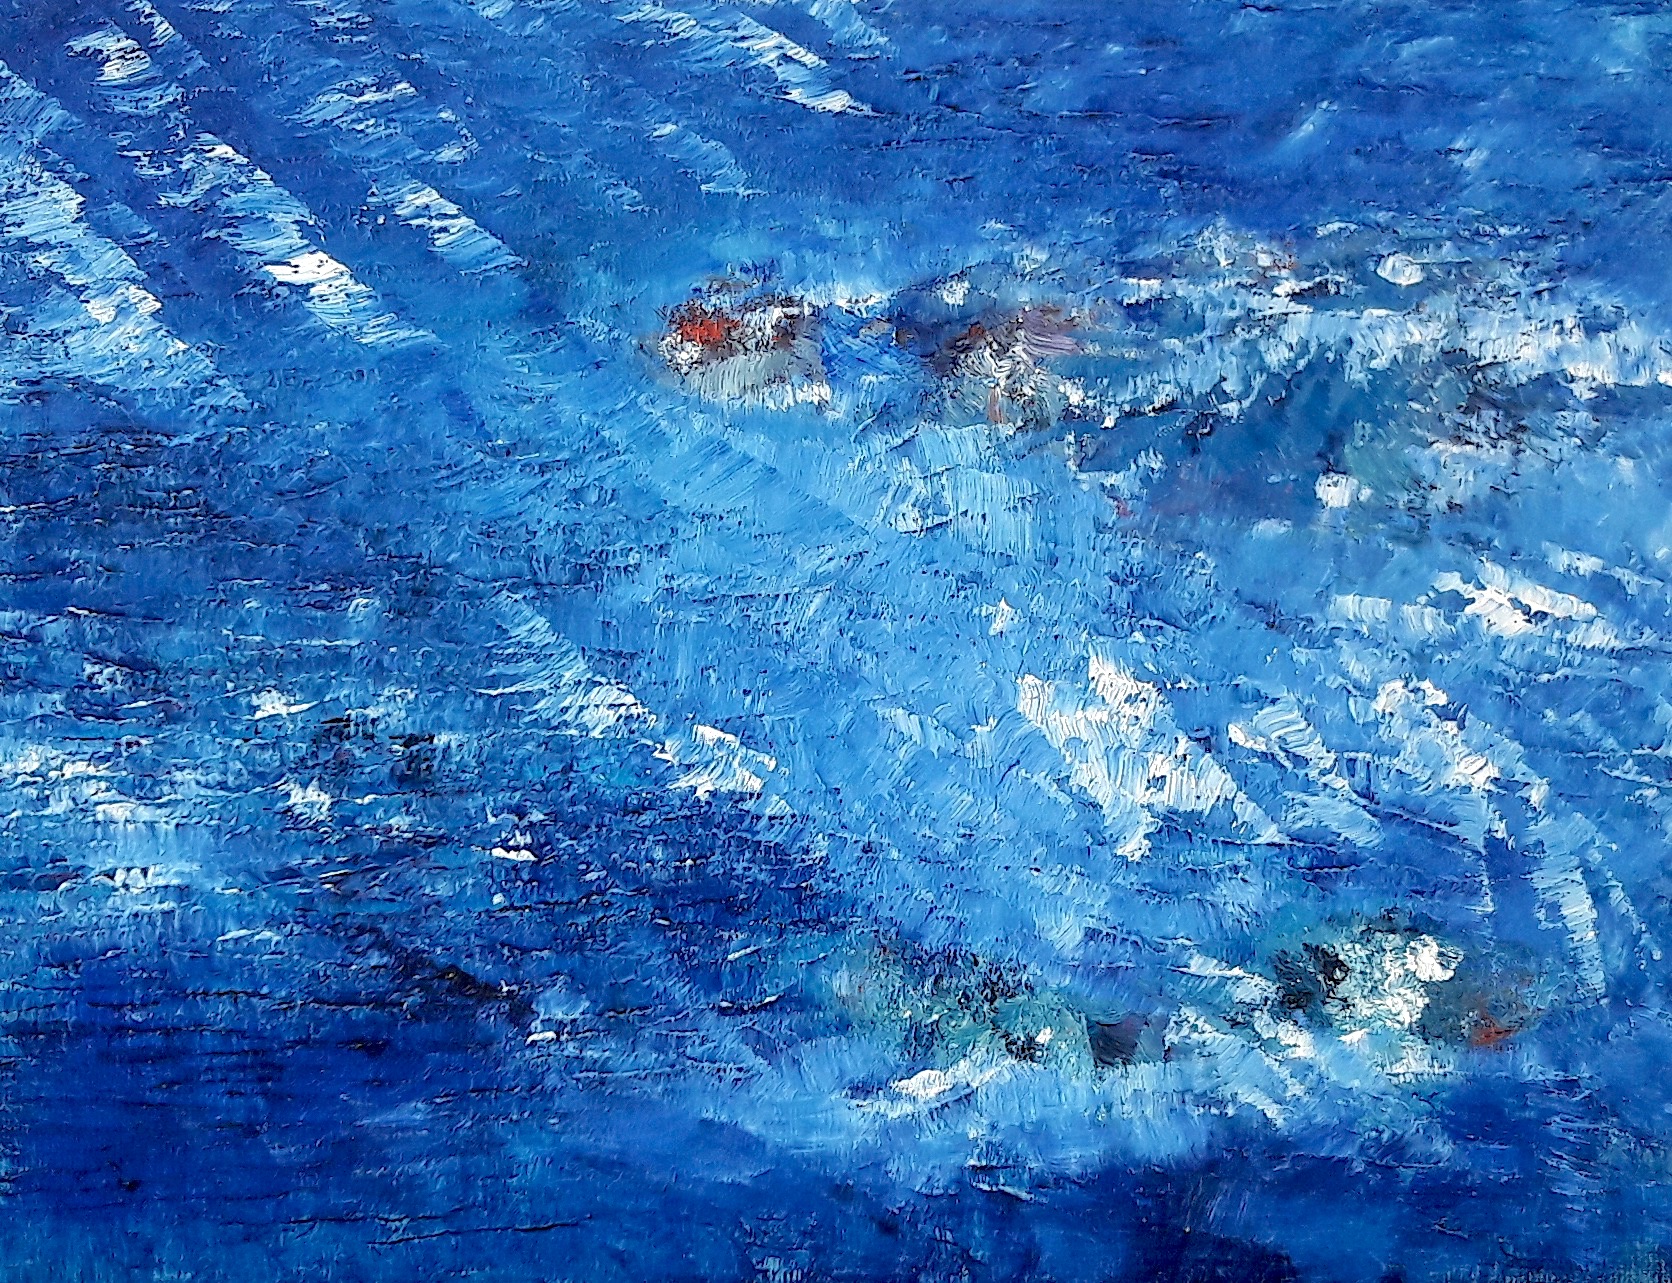 painting of a reef in the ocean, seen from above, in an helicopter, by Samuel Rondiere a.k.a. Sam Elka